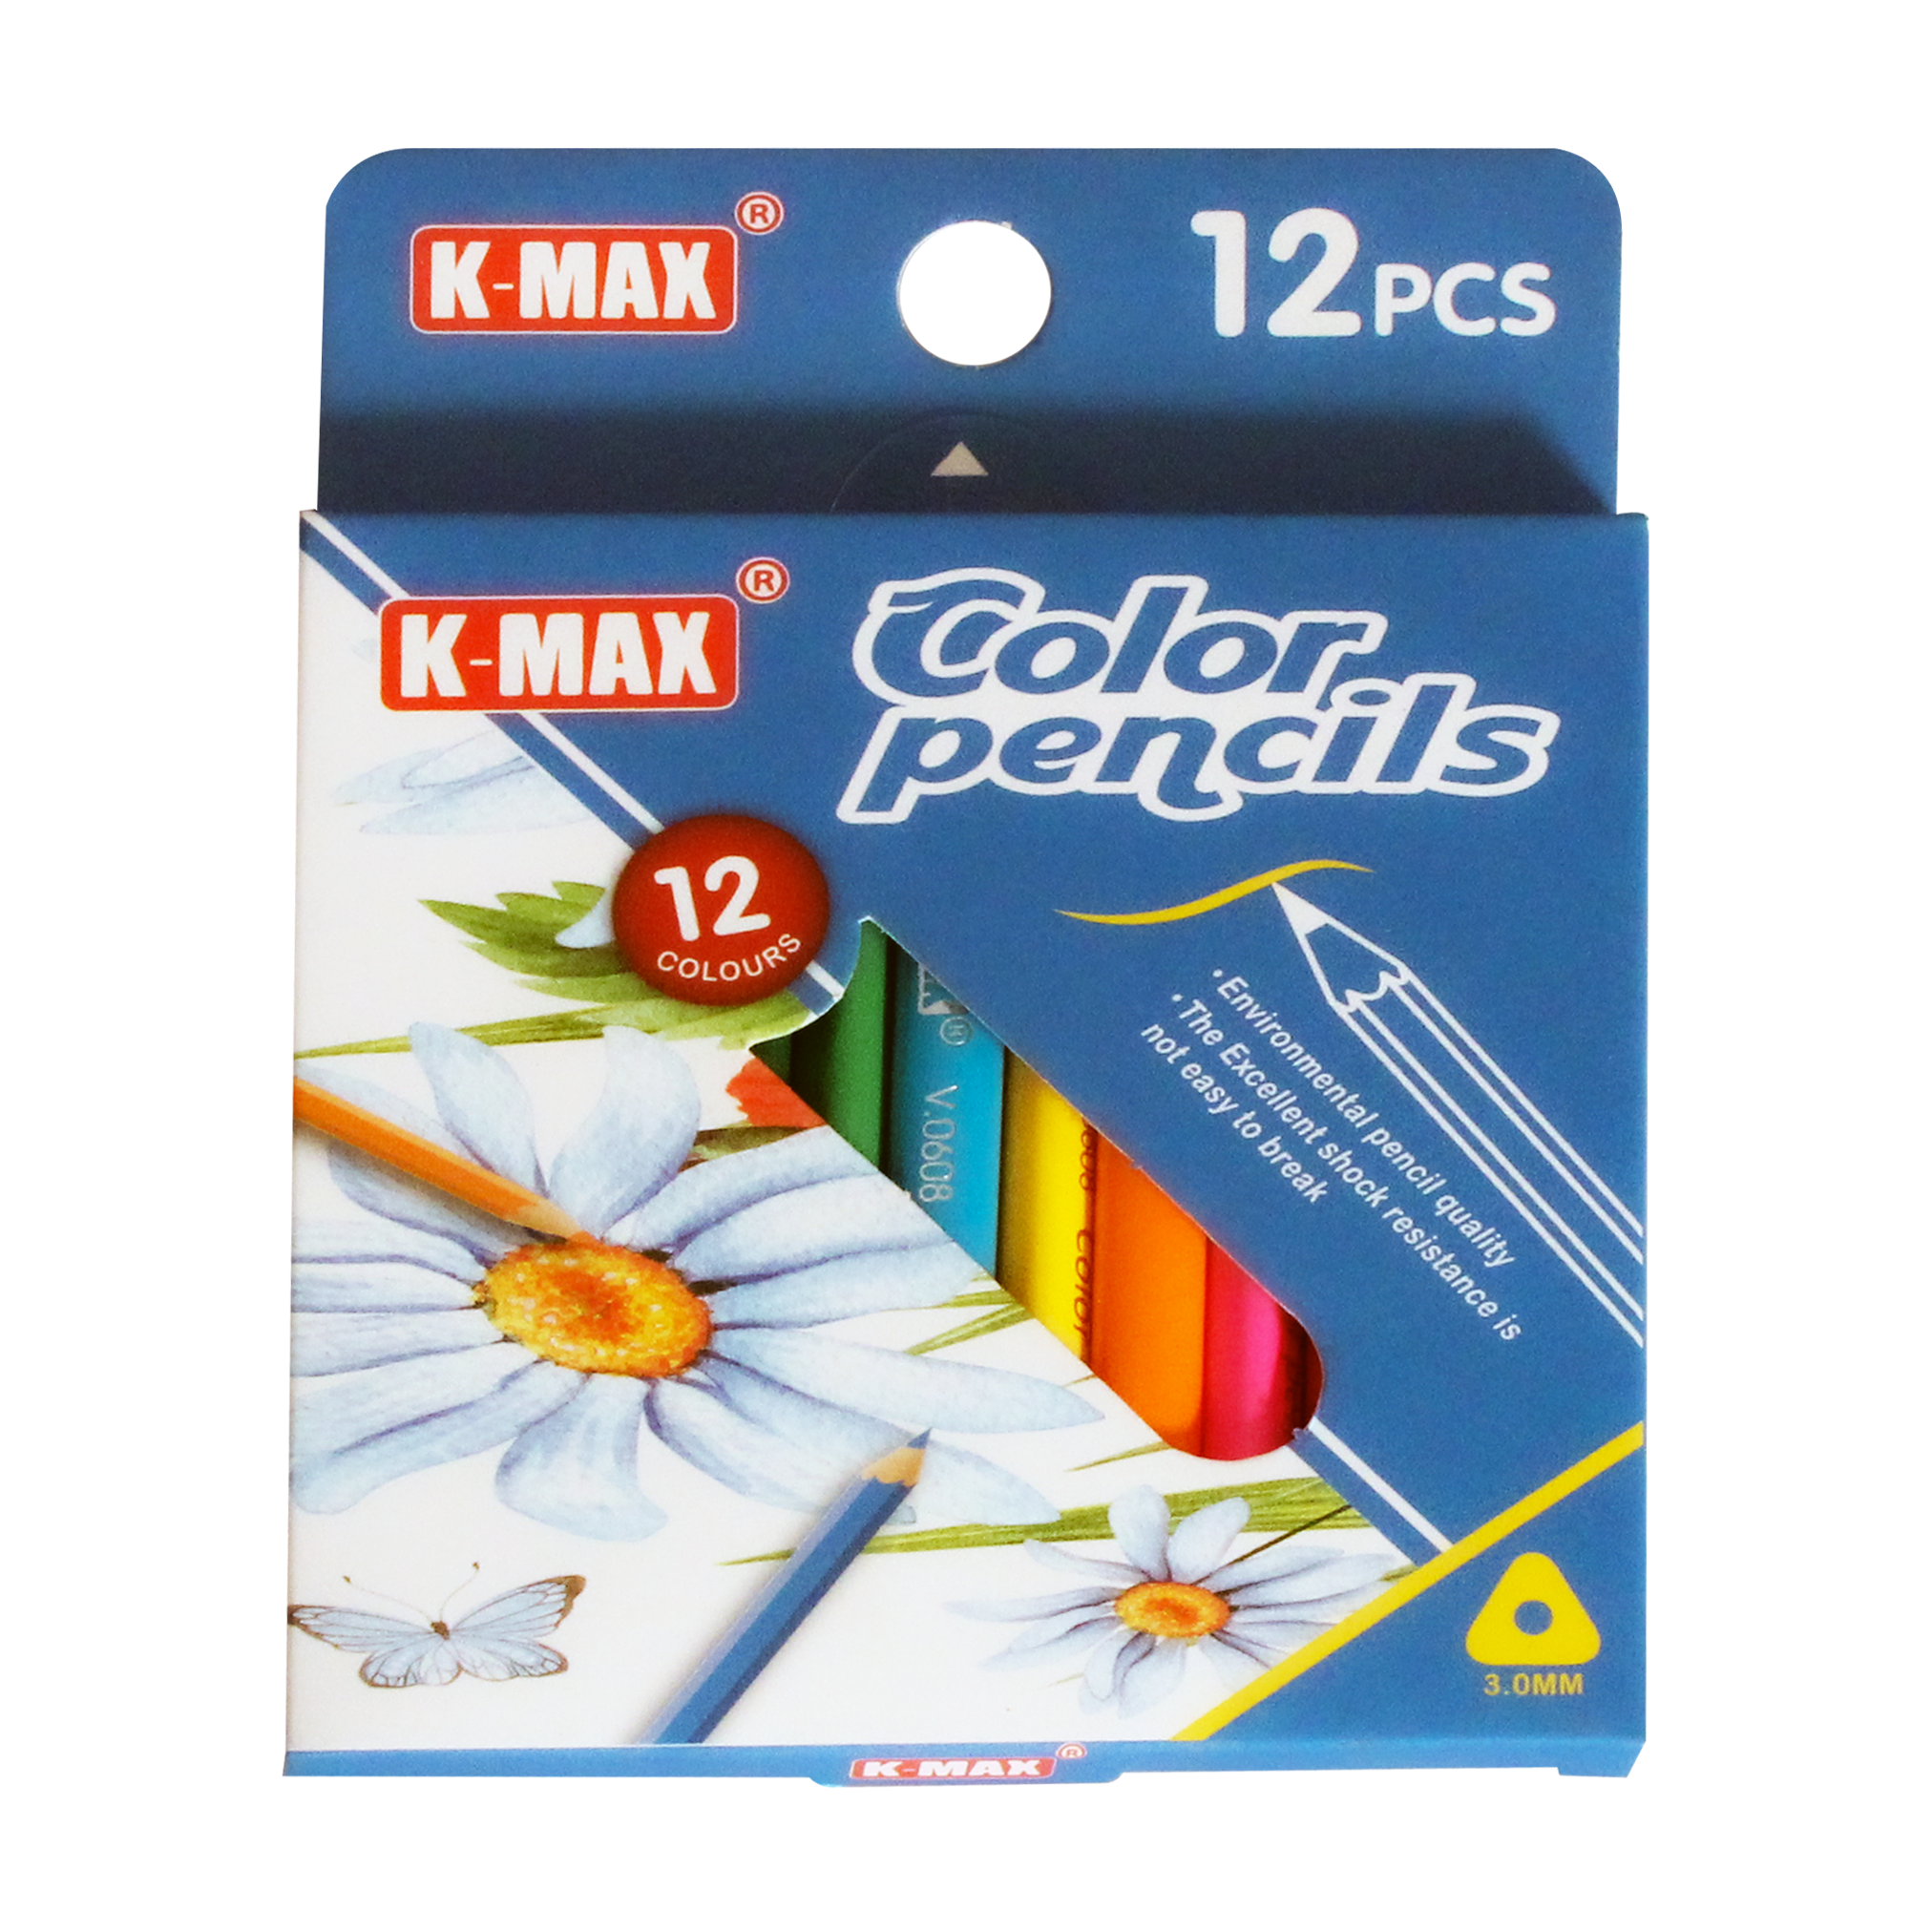 KMS V.0608 Colored Pencils Art Supplies for Drawing - Set of 12 Small